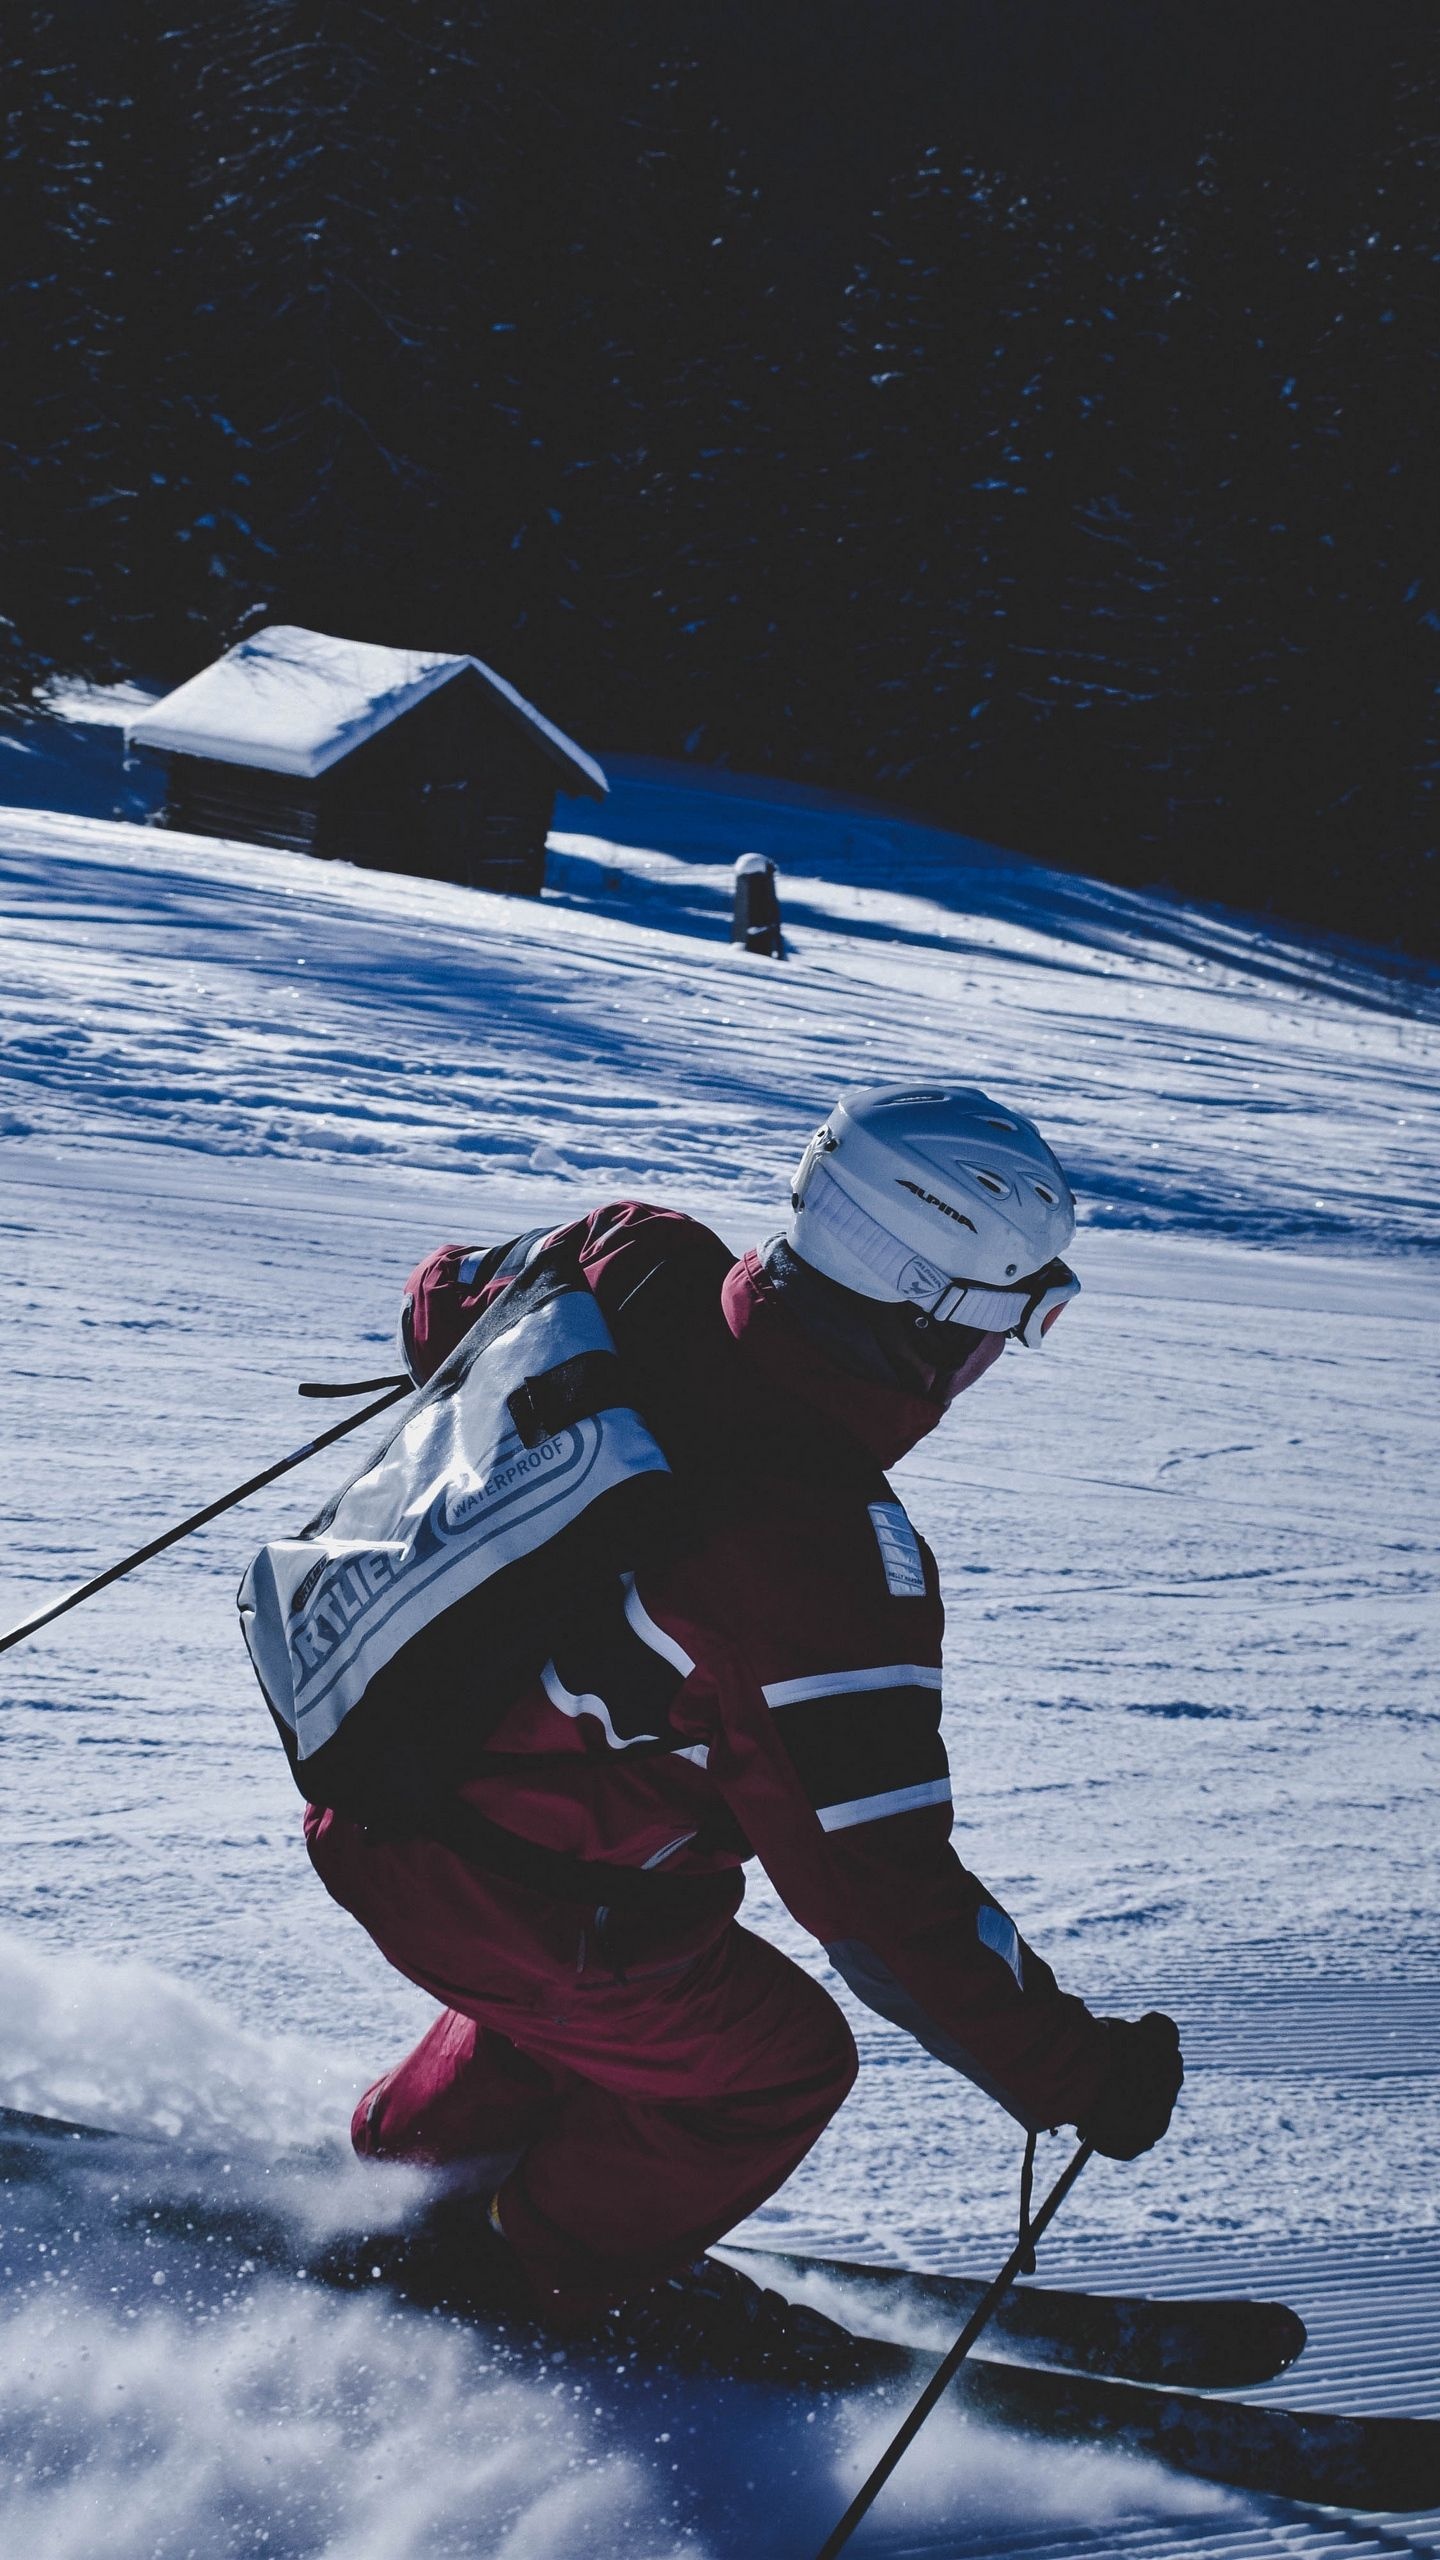 Alpine Skiing: Passing the distance on a snow track, Downhill between obstacles, Winter fun. 1440x2560 HD Wallpaper.